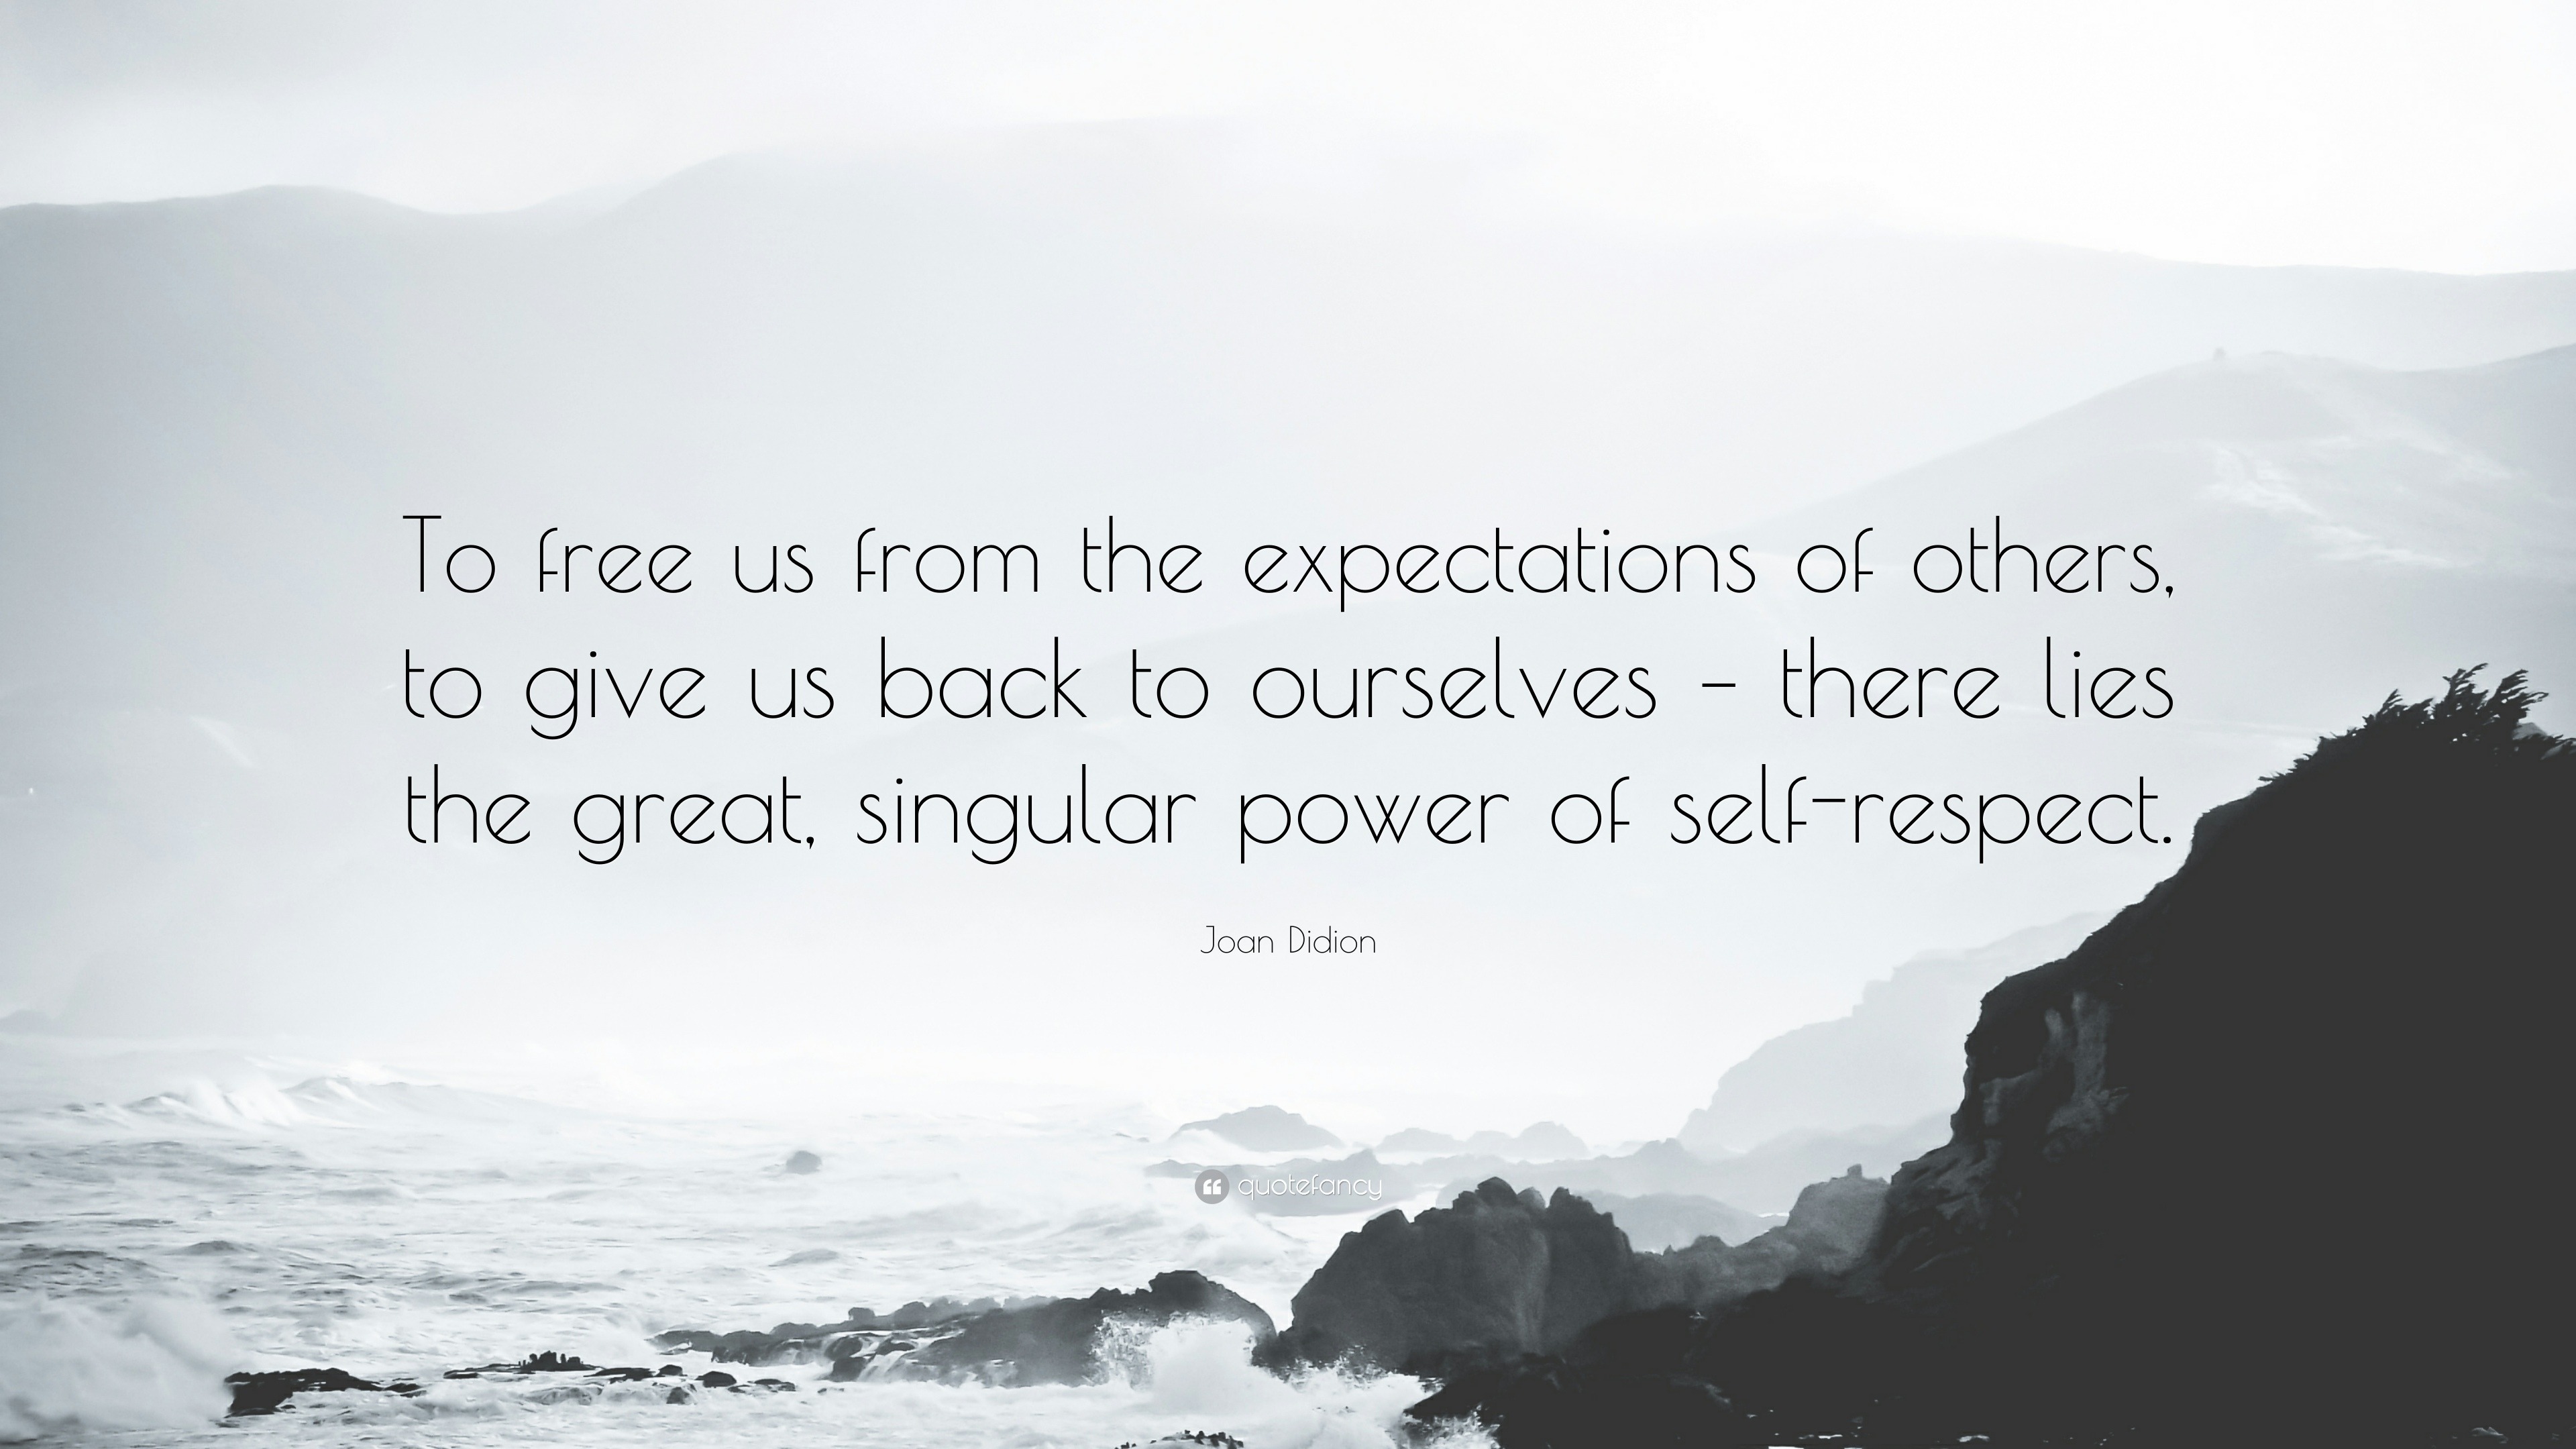 Joan Didion Quote “to Free Us From The Expectations Of Others To Give Us Back To Ourselves